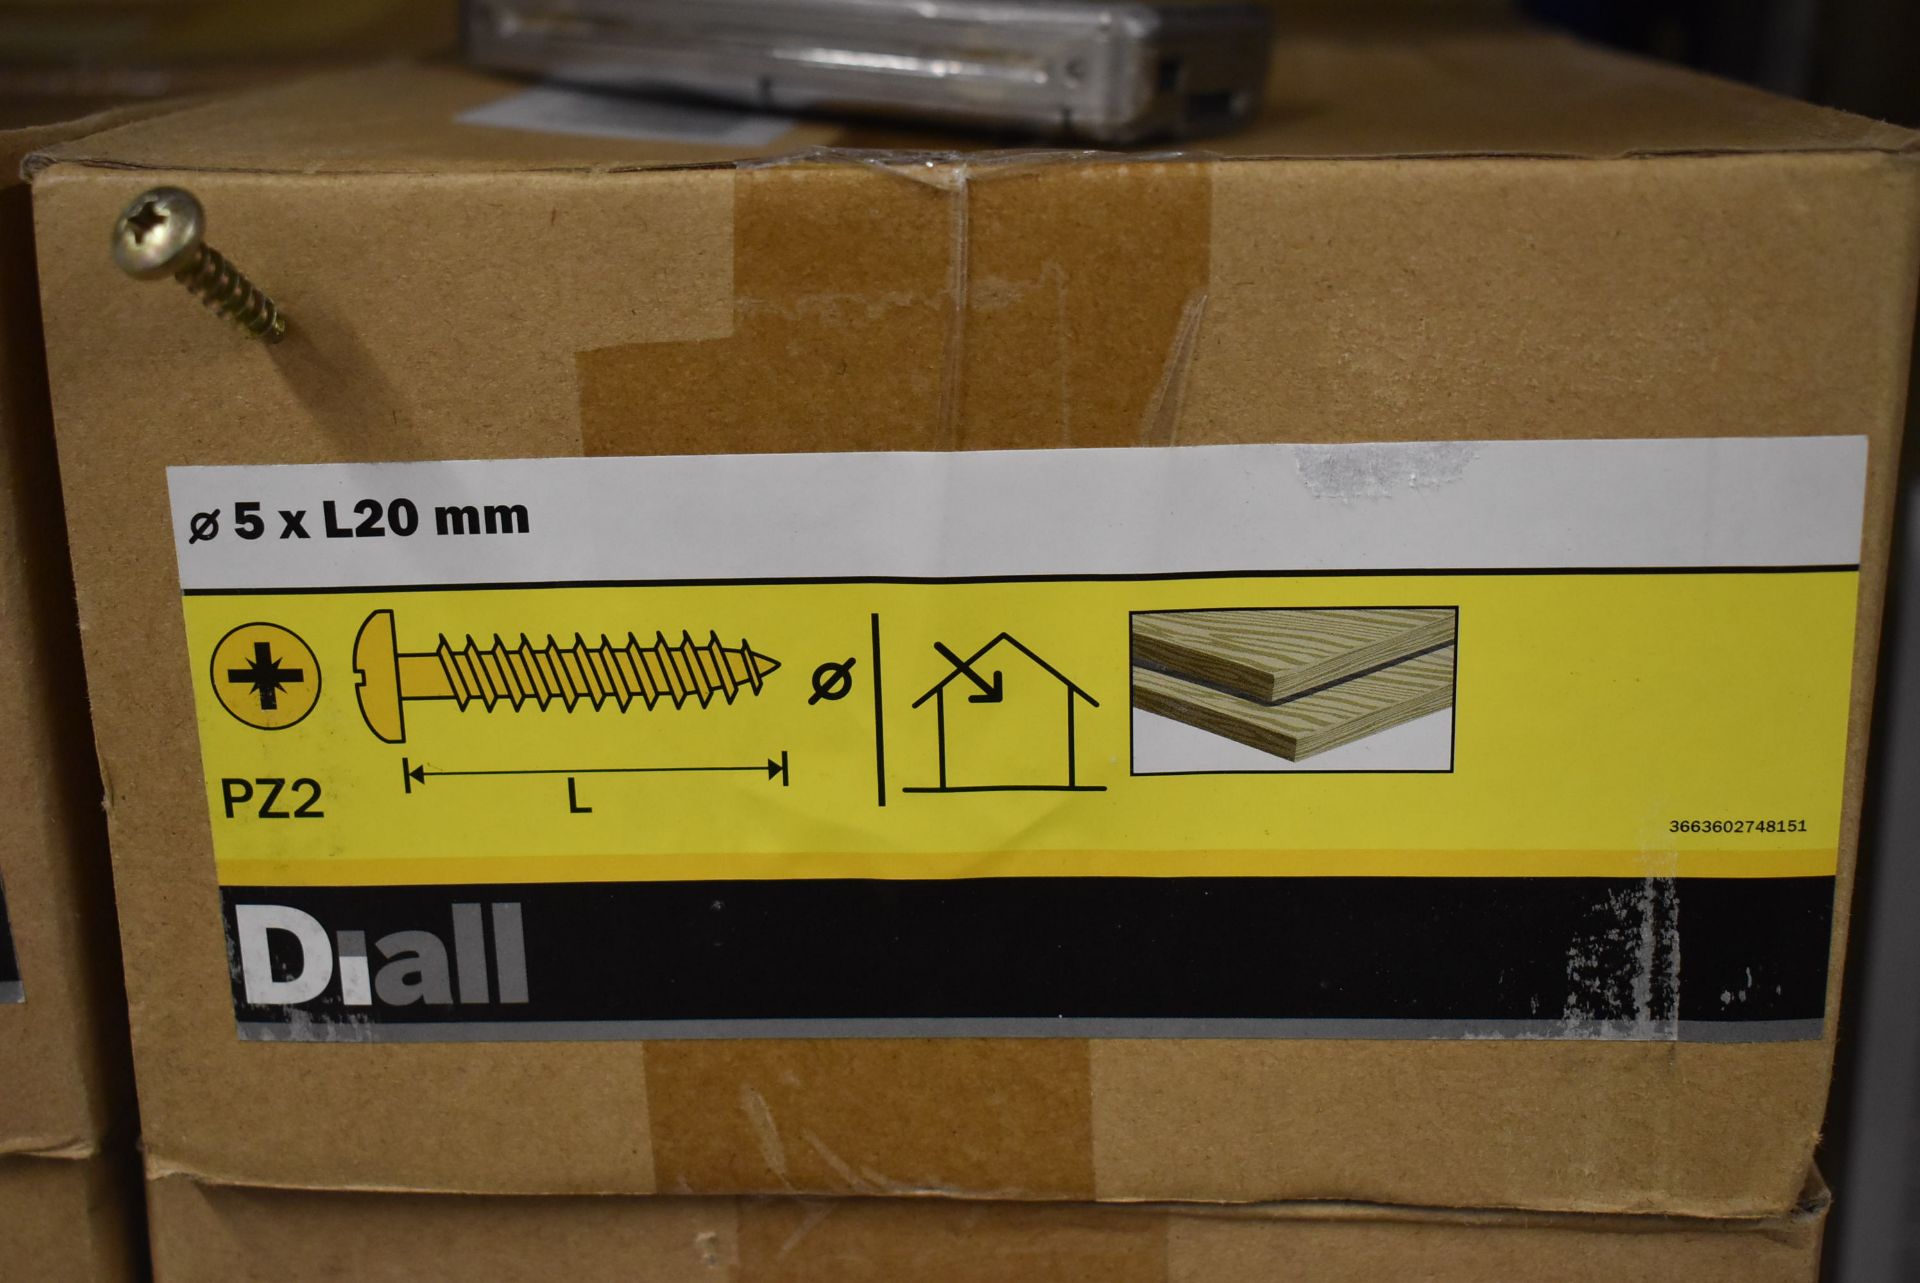 Two Boxes of Diall 5x L20mm Wood Screws